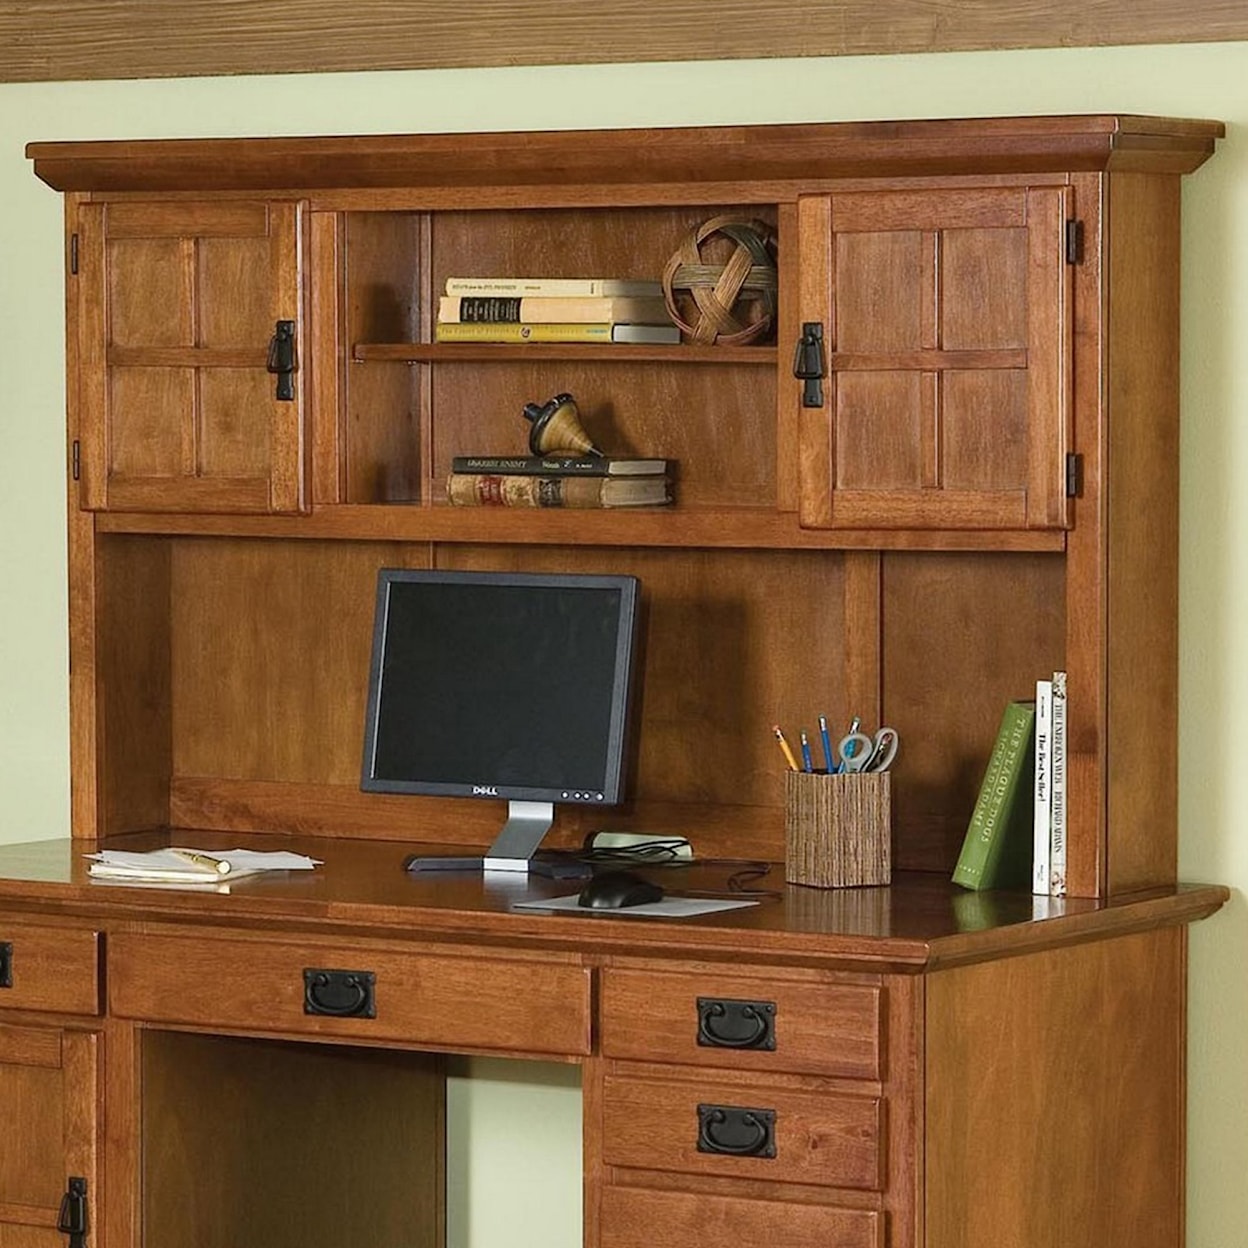 homestyles Arts and Crafts Double Pedestal Desk and Hutch